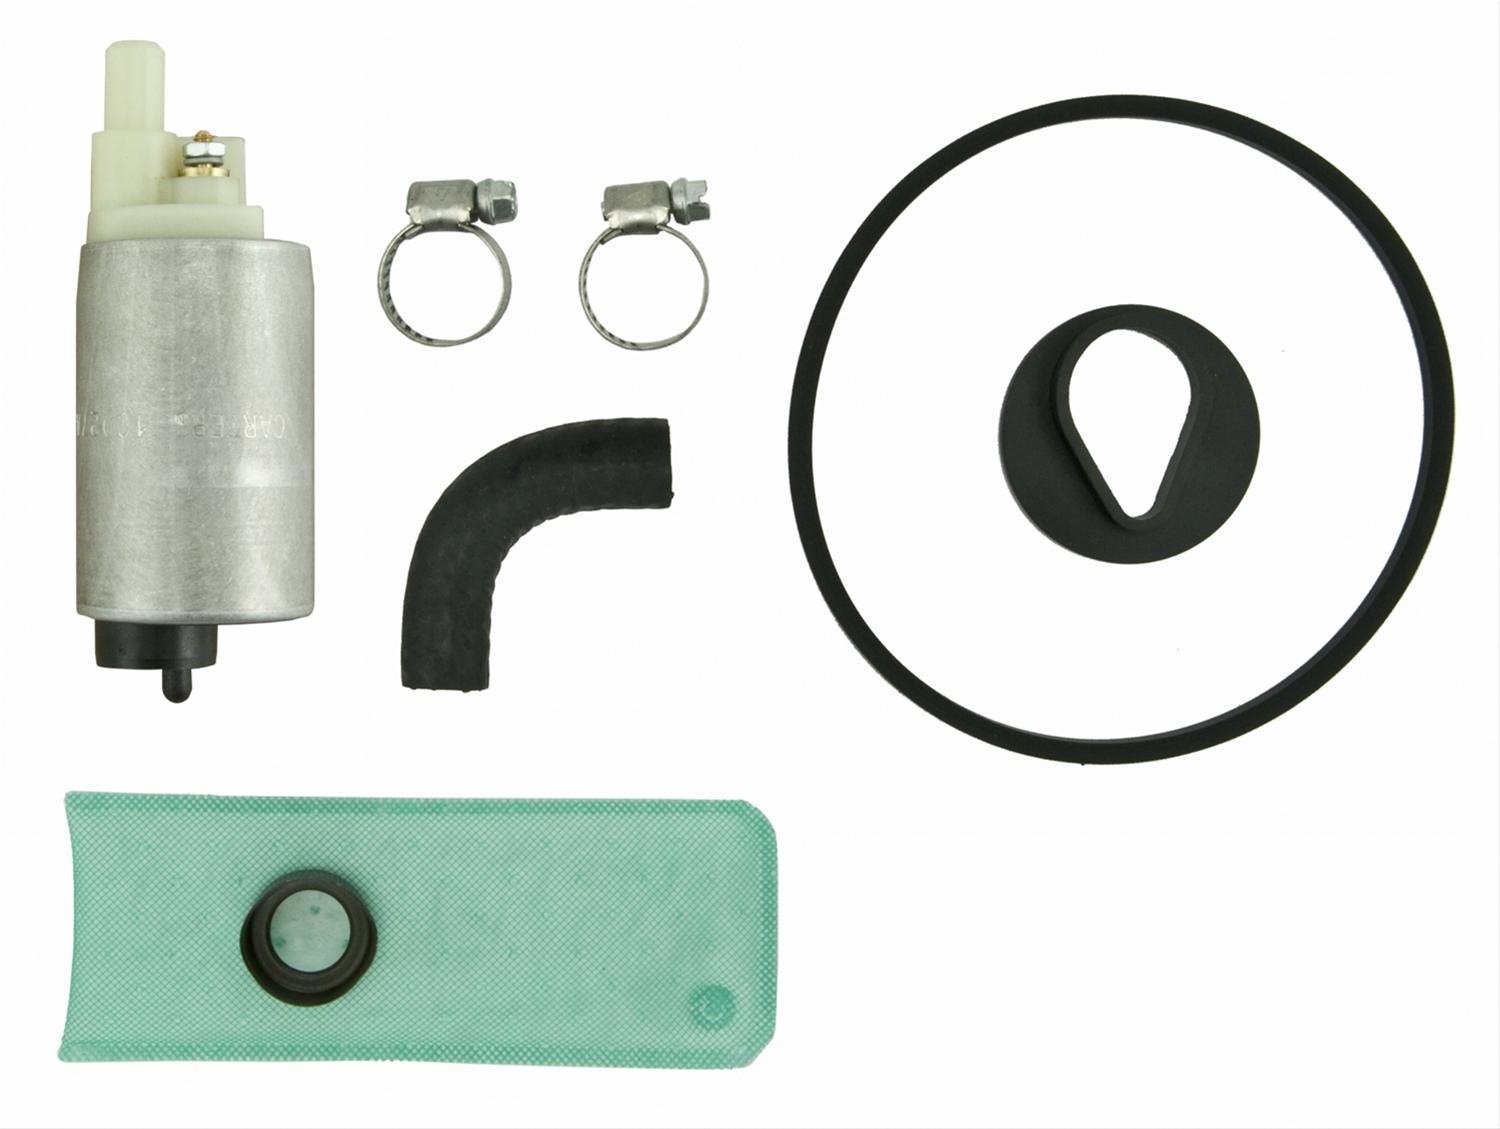 EFI In-Tank Electric Fuel Pump And Strainer Set for 1988-1991 Ford E-Series